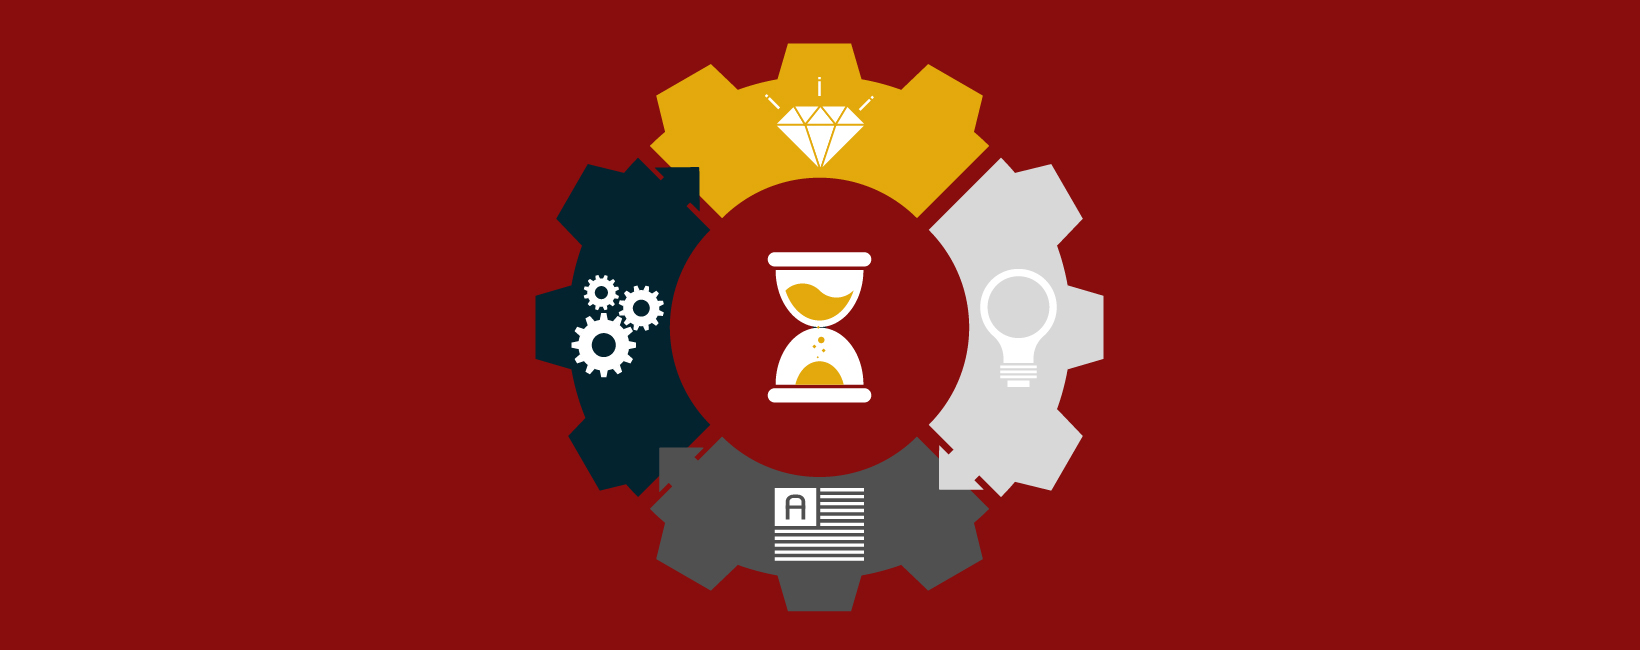 Illustrated image of gears turning around an hourglass, indicating the interconnected pieces of blog writing in higher ed.